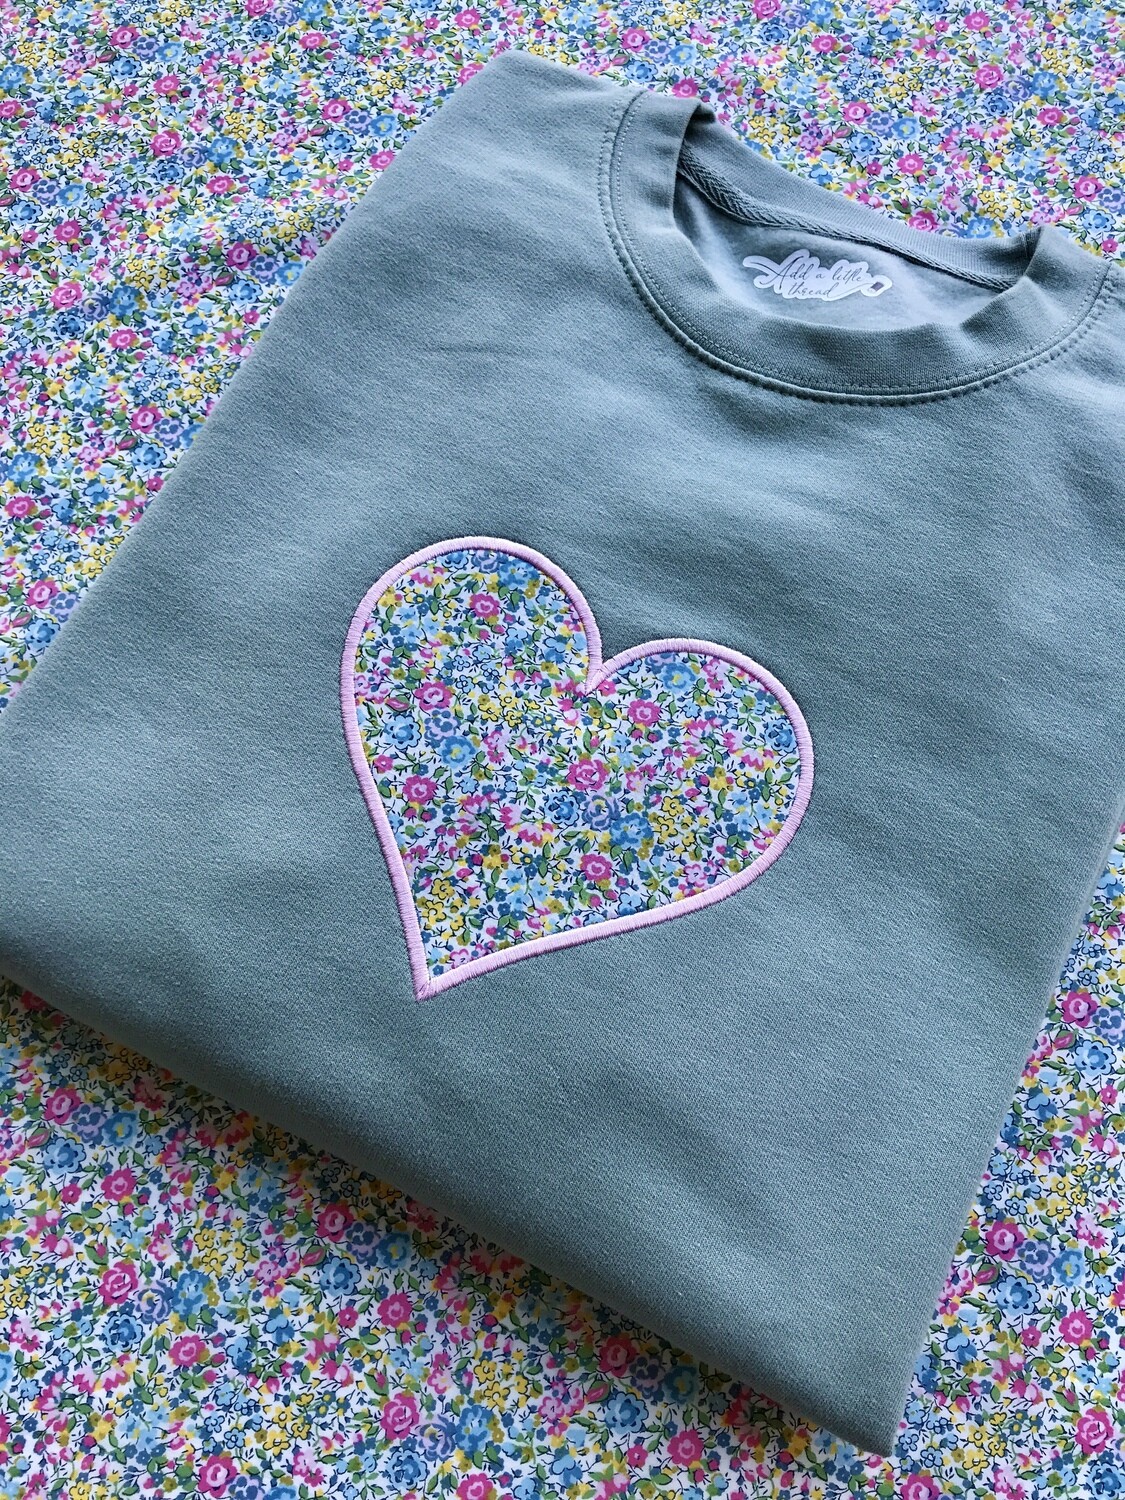 Heart Design On Relaxed Fit Sweatshirt